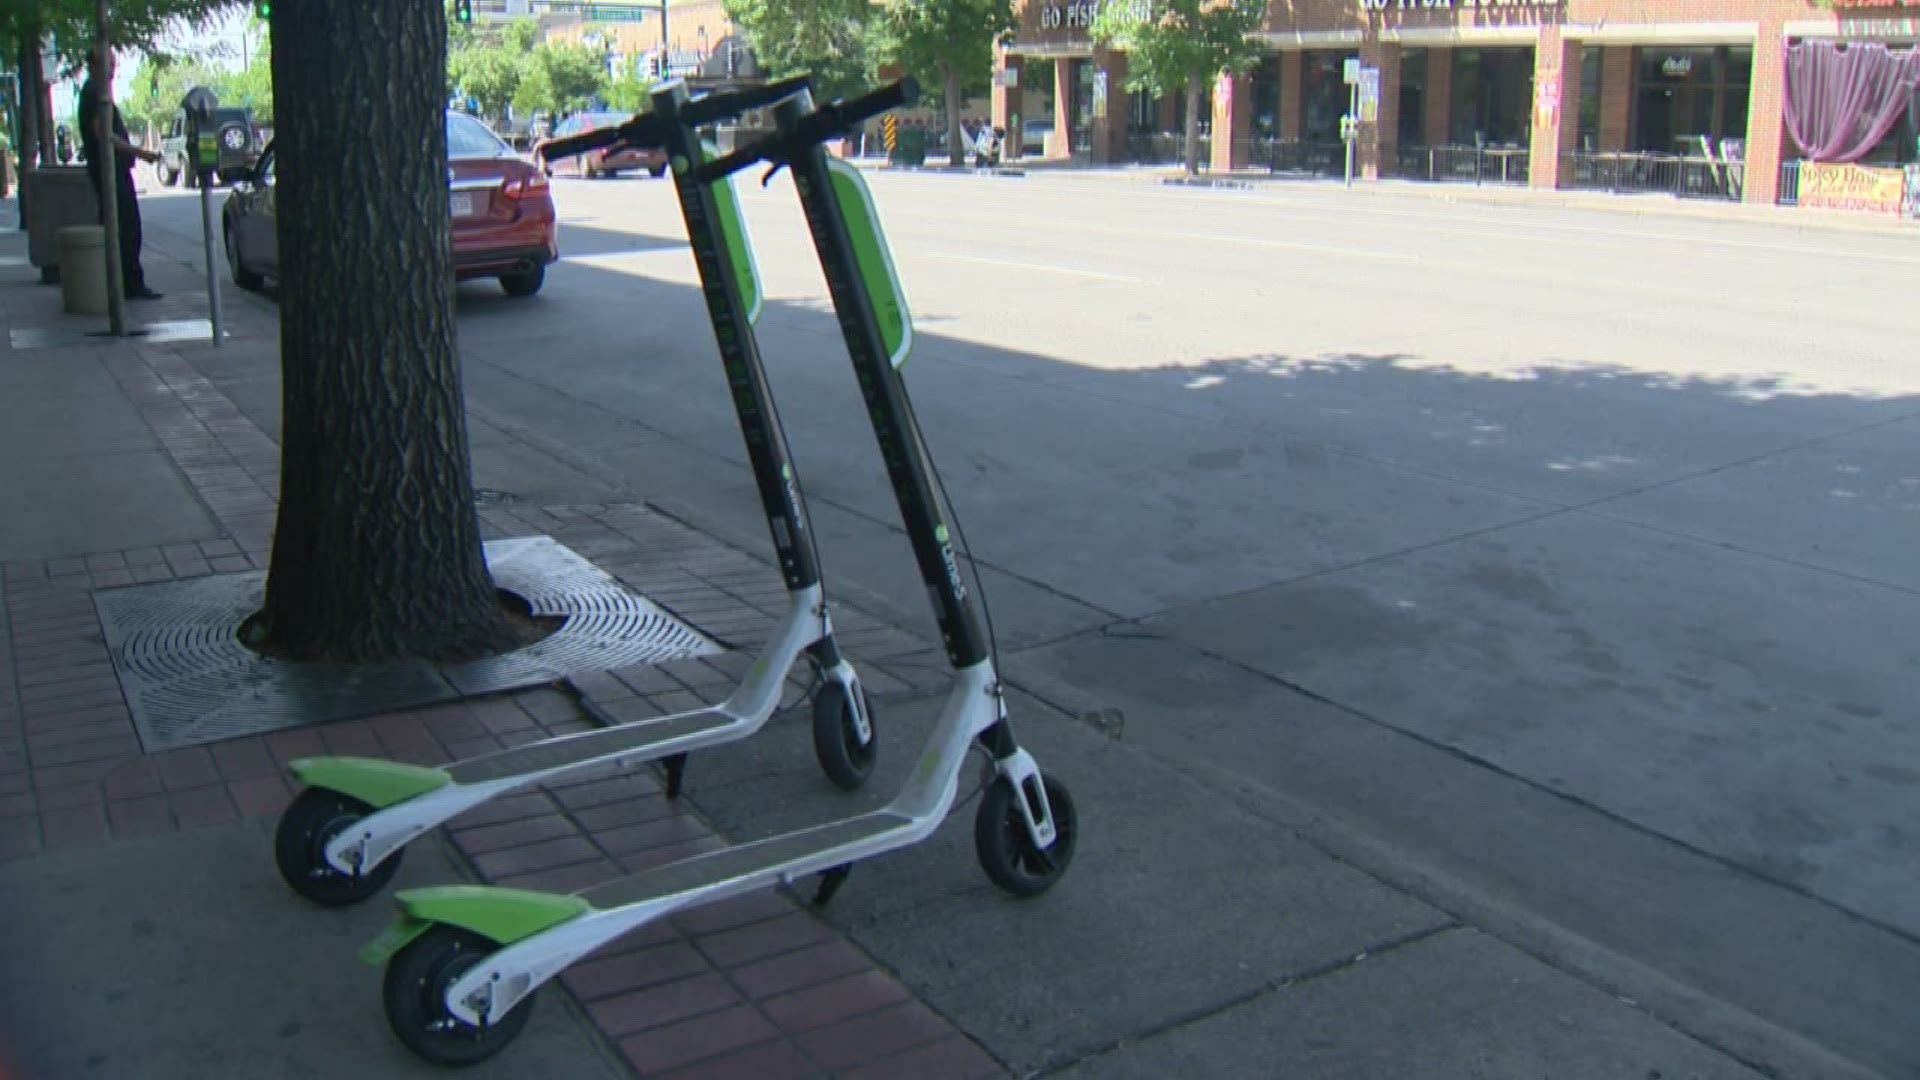 You won't be able to ride Lime scooters in Denver for at least the next two weeks.